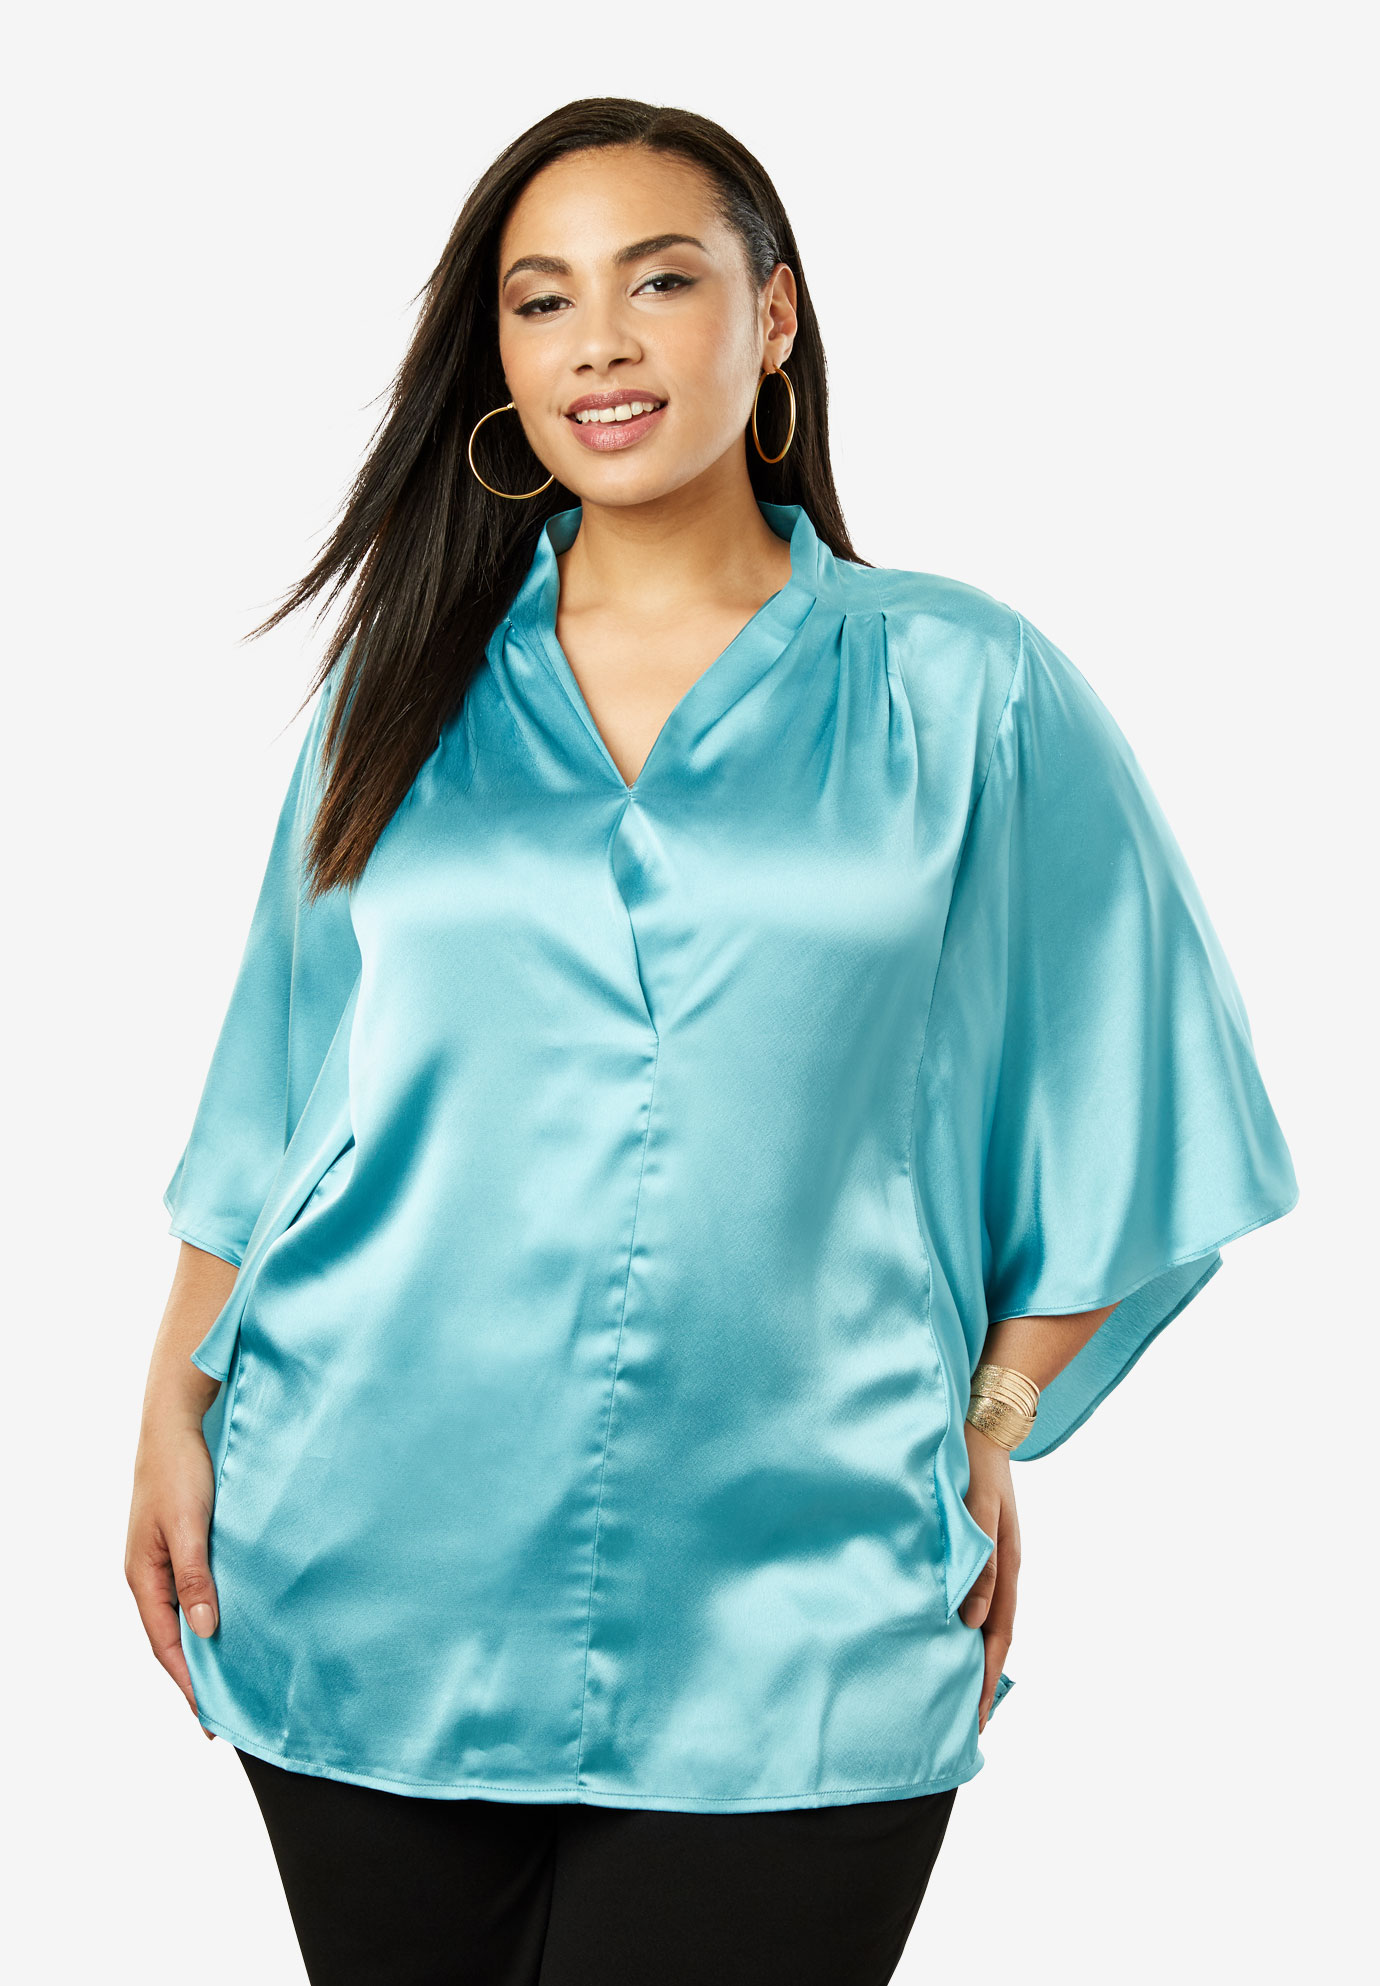 where to buy womens silk tops fit